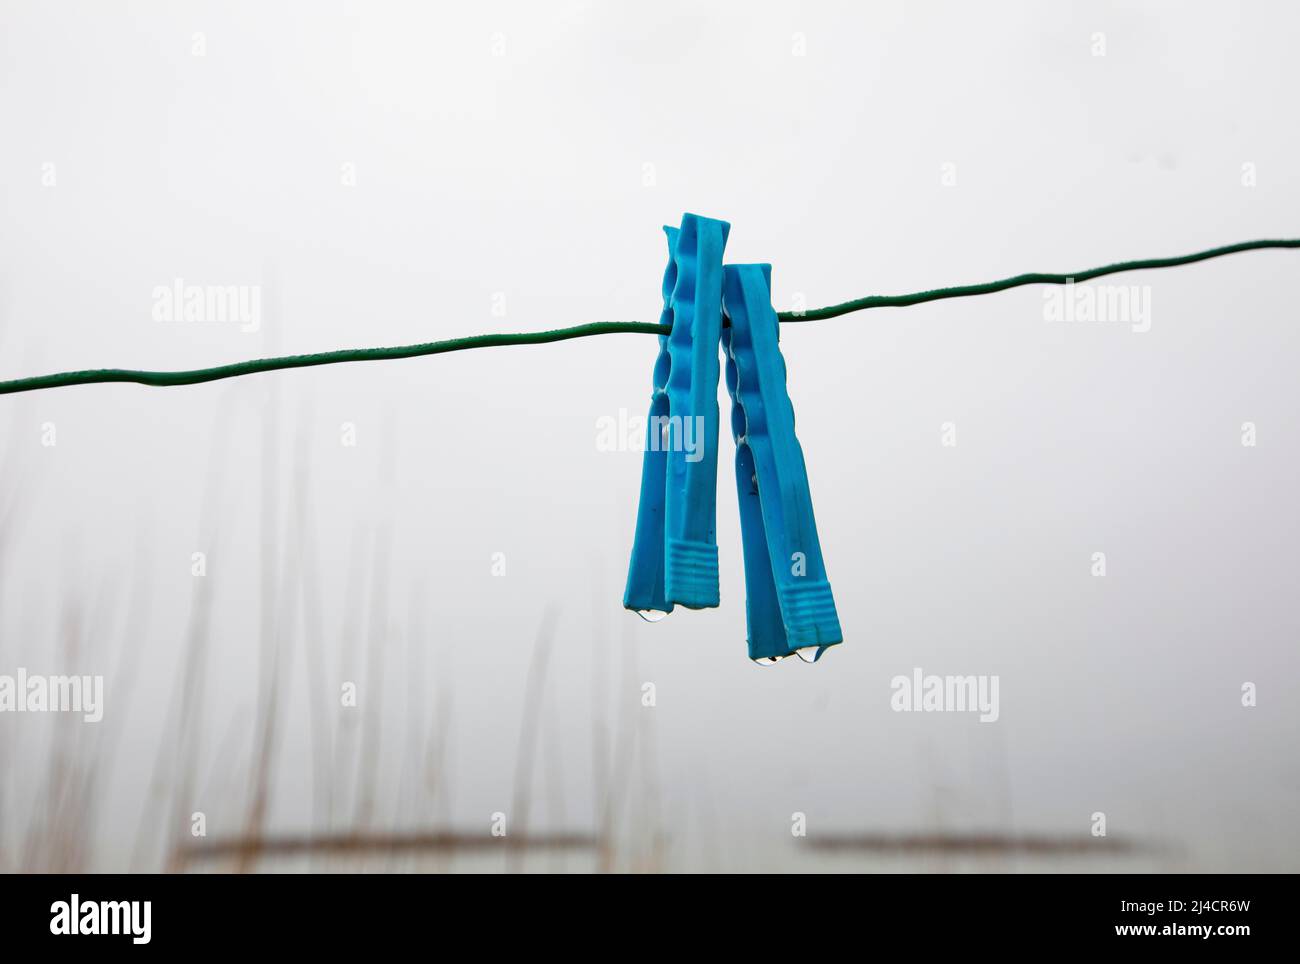 Clothes pegs on a rope with water drops, Mondsee, Salzkammergut, Upper Austria, Austria Stock Photo